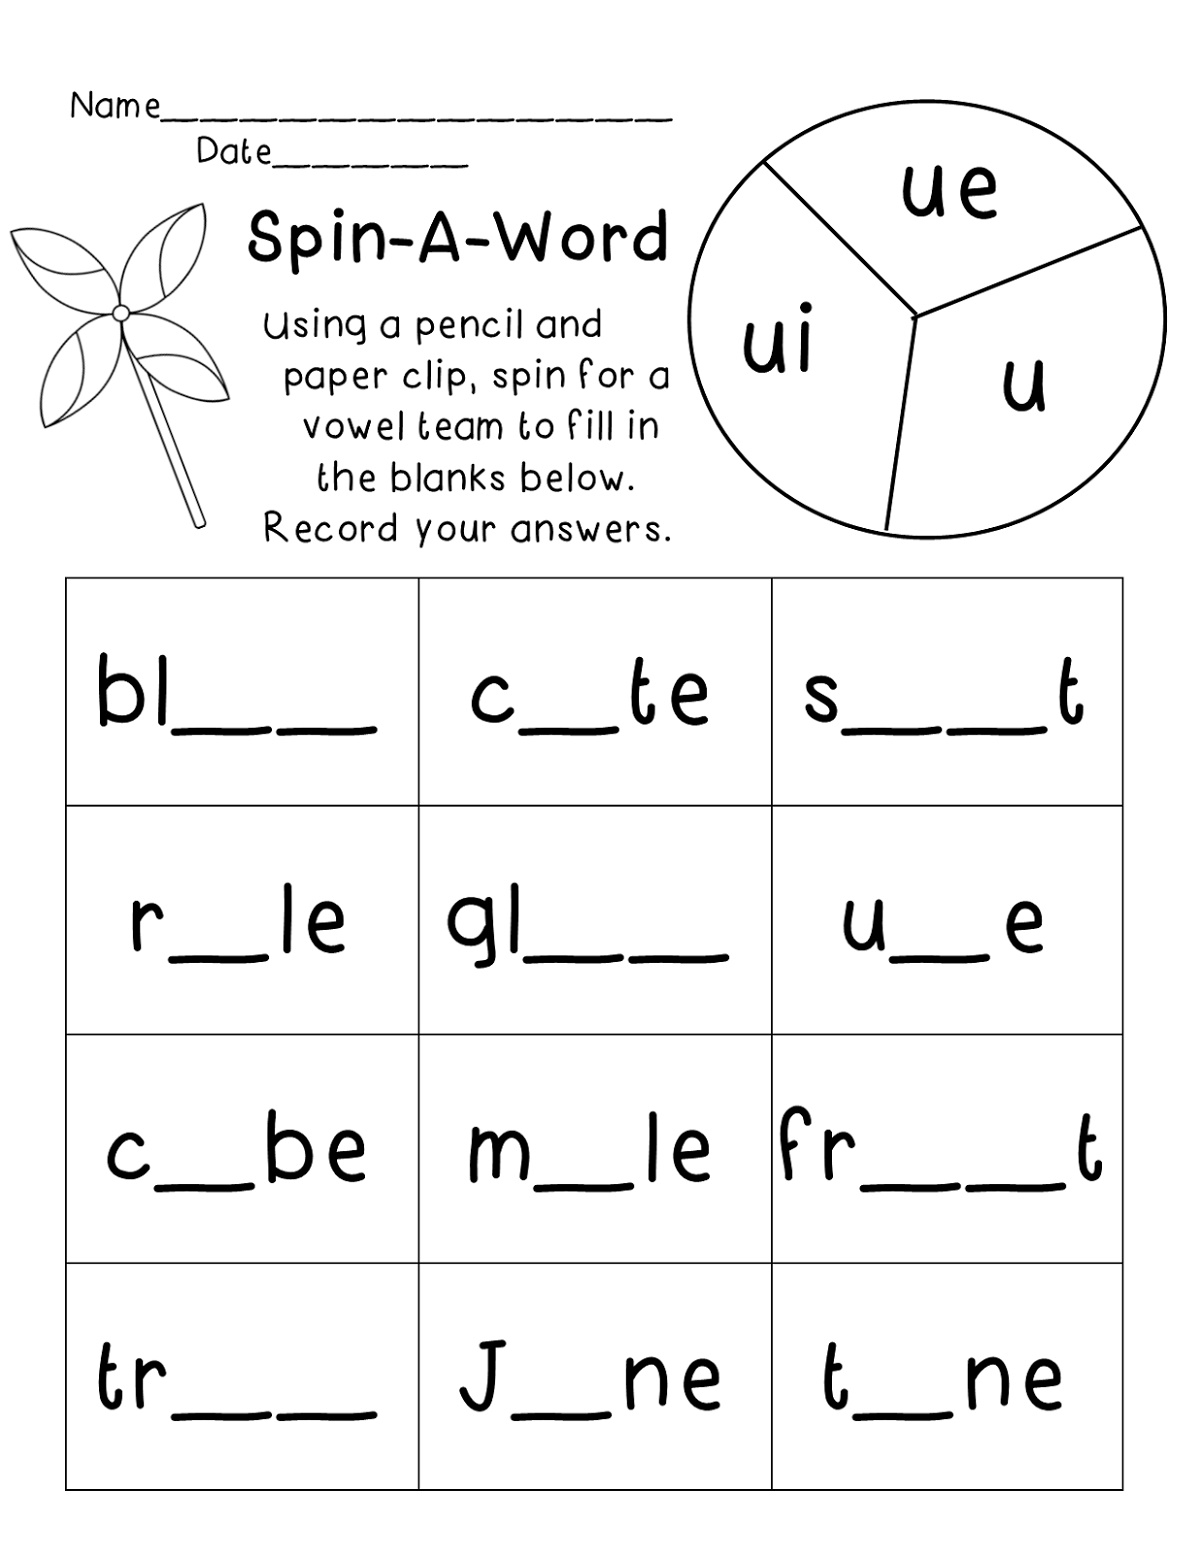 Primary School Worksheets Spin A Word